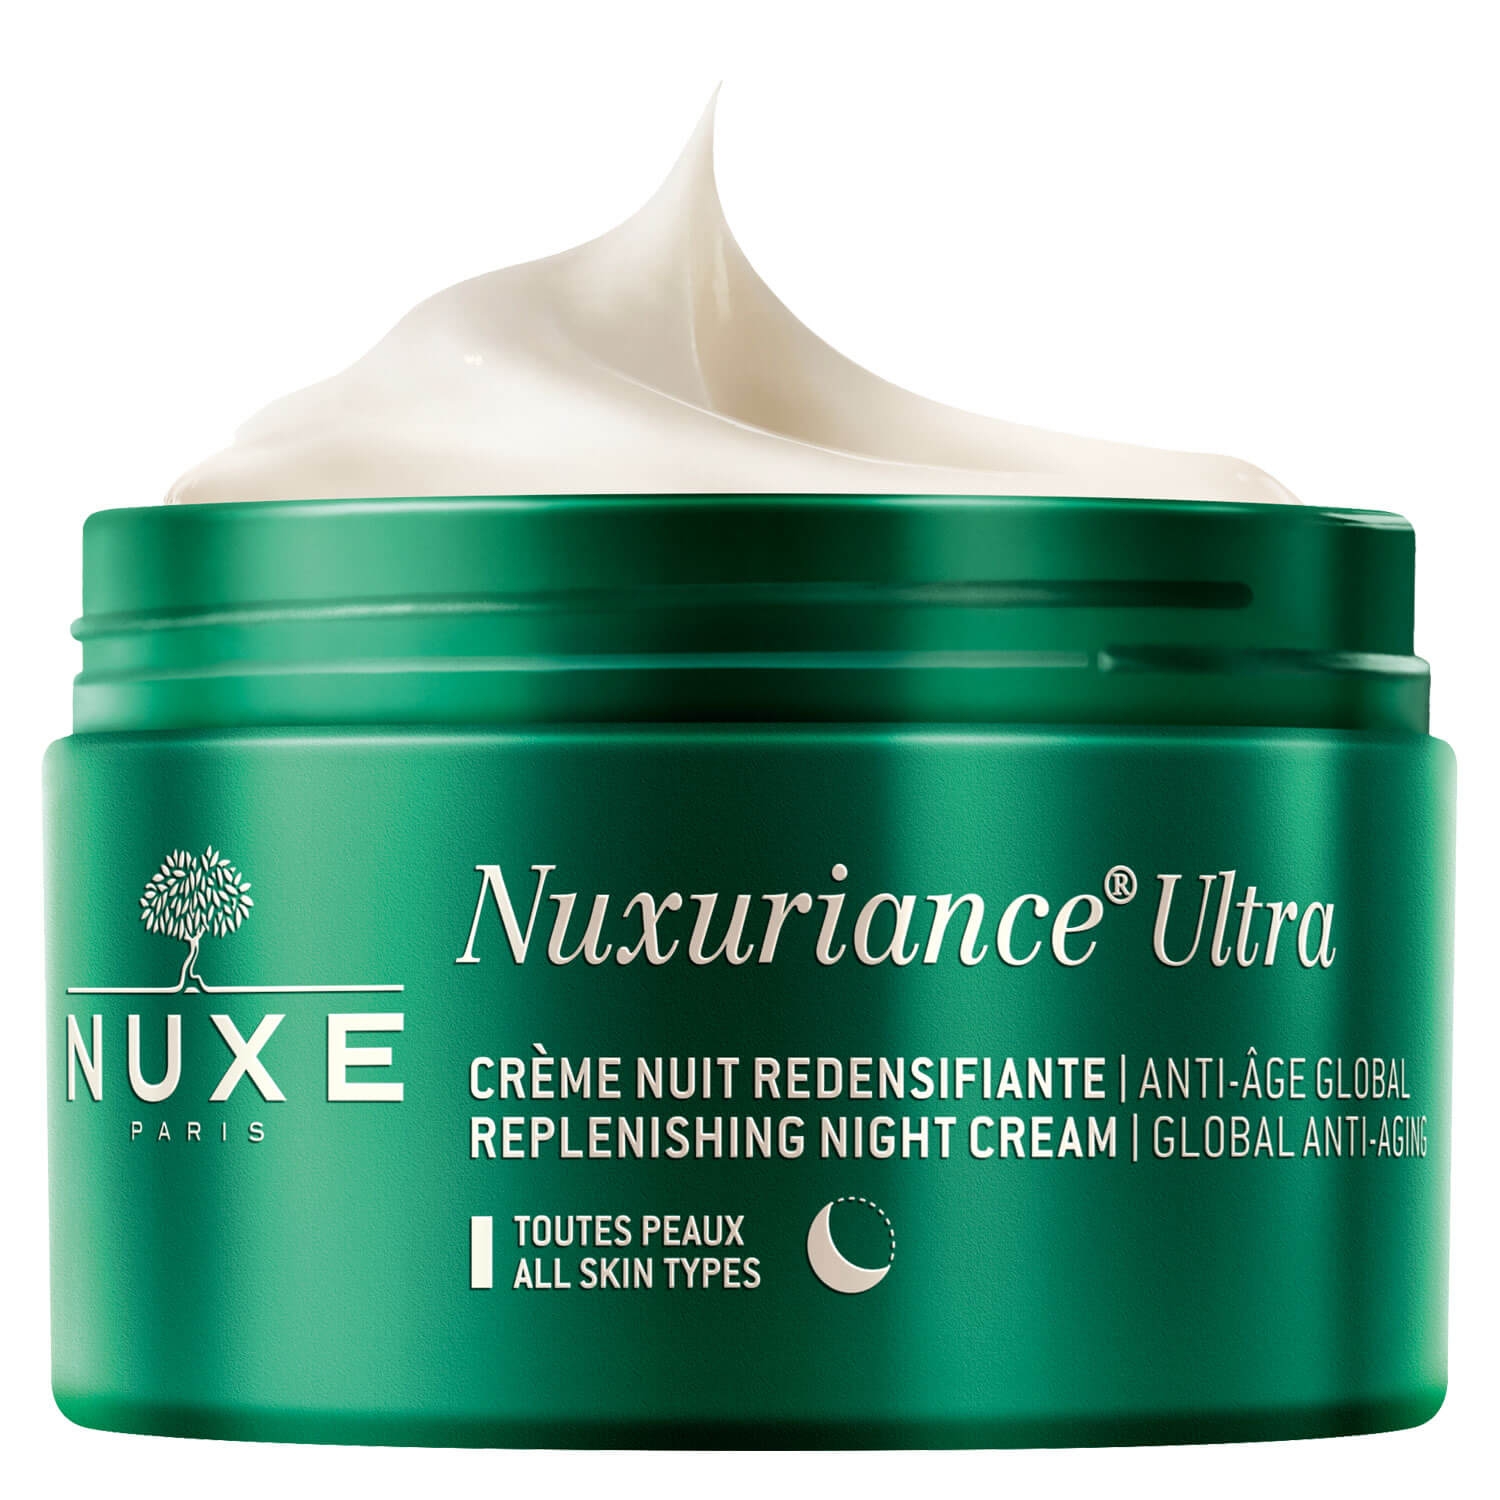 Product image from Nuxuriance Ultra - Crème Nuit Redensifiante